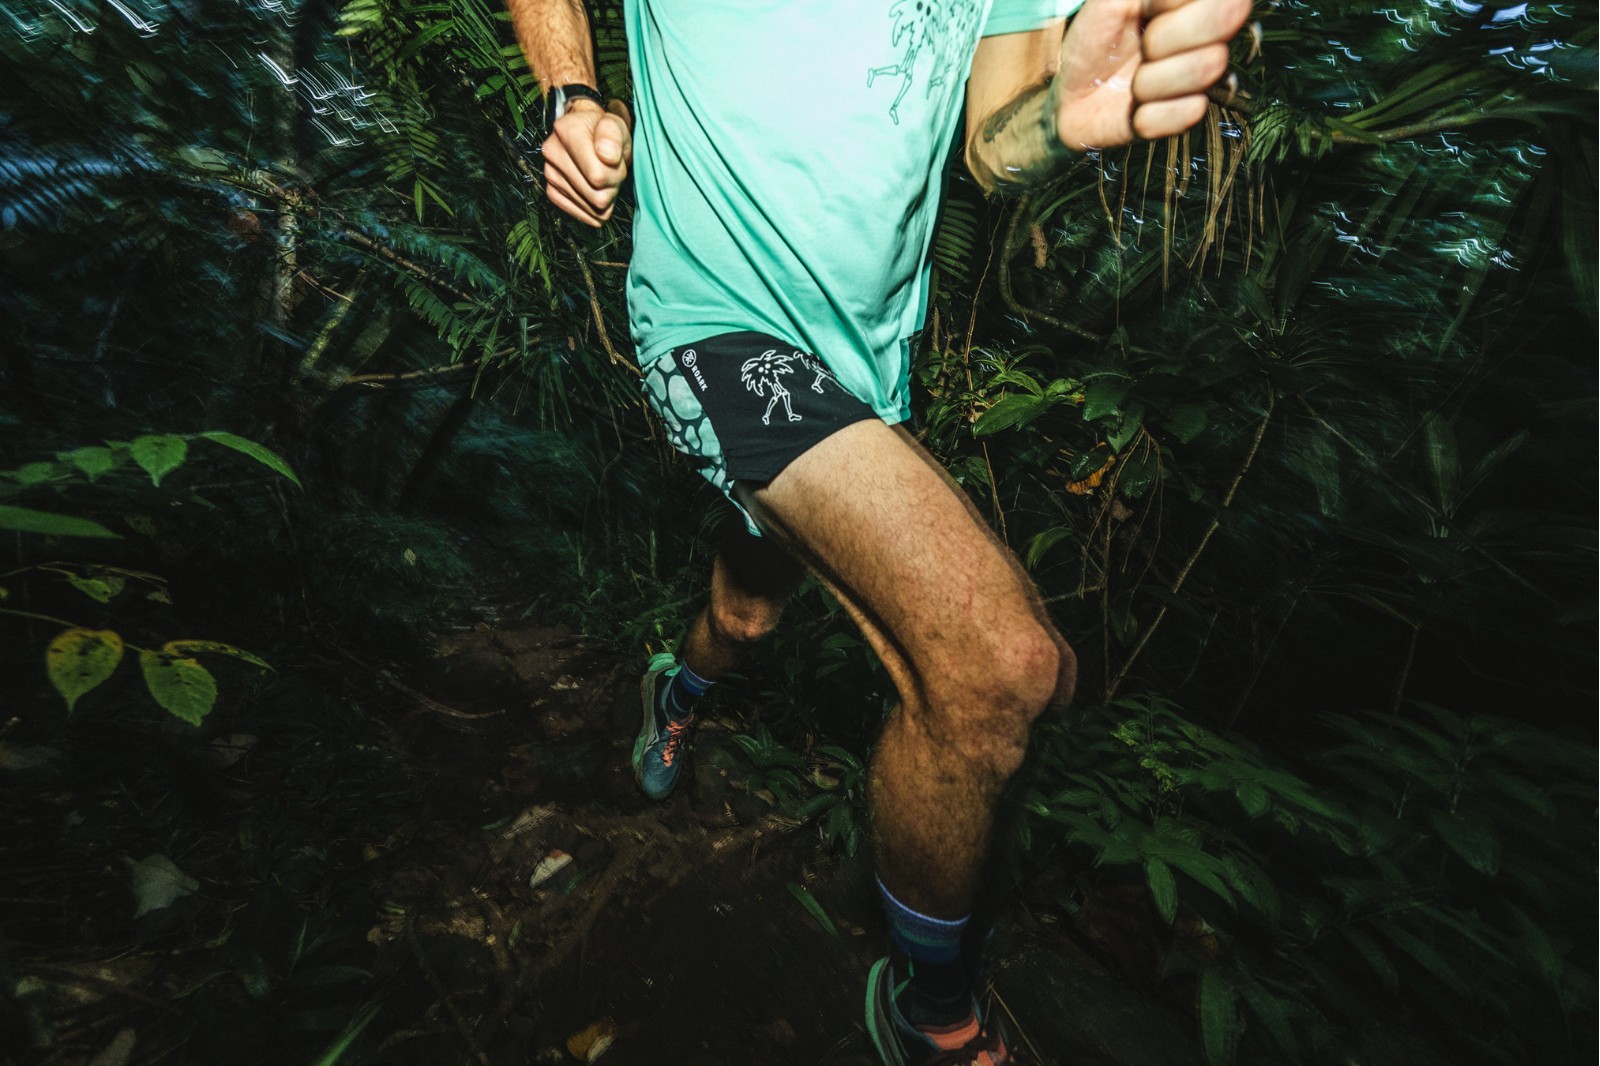 running shorts in the jungle at night